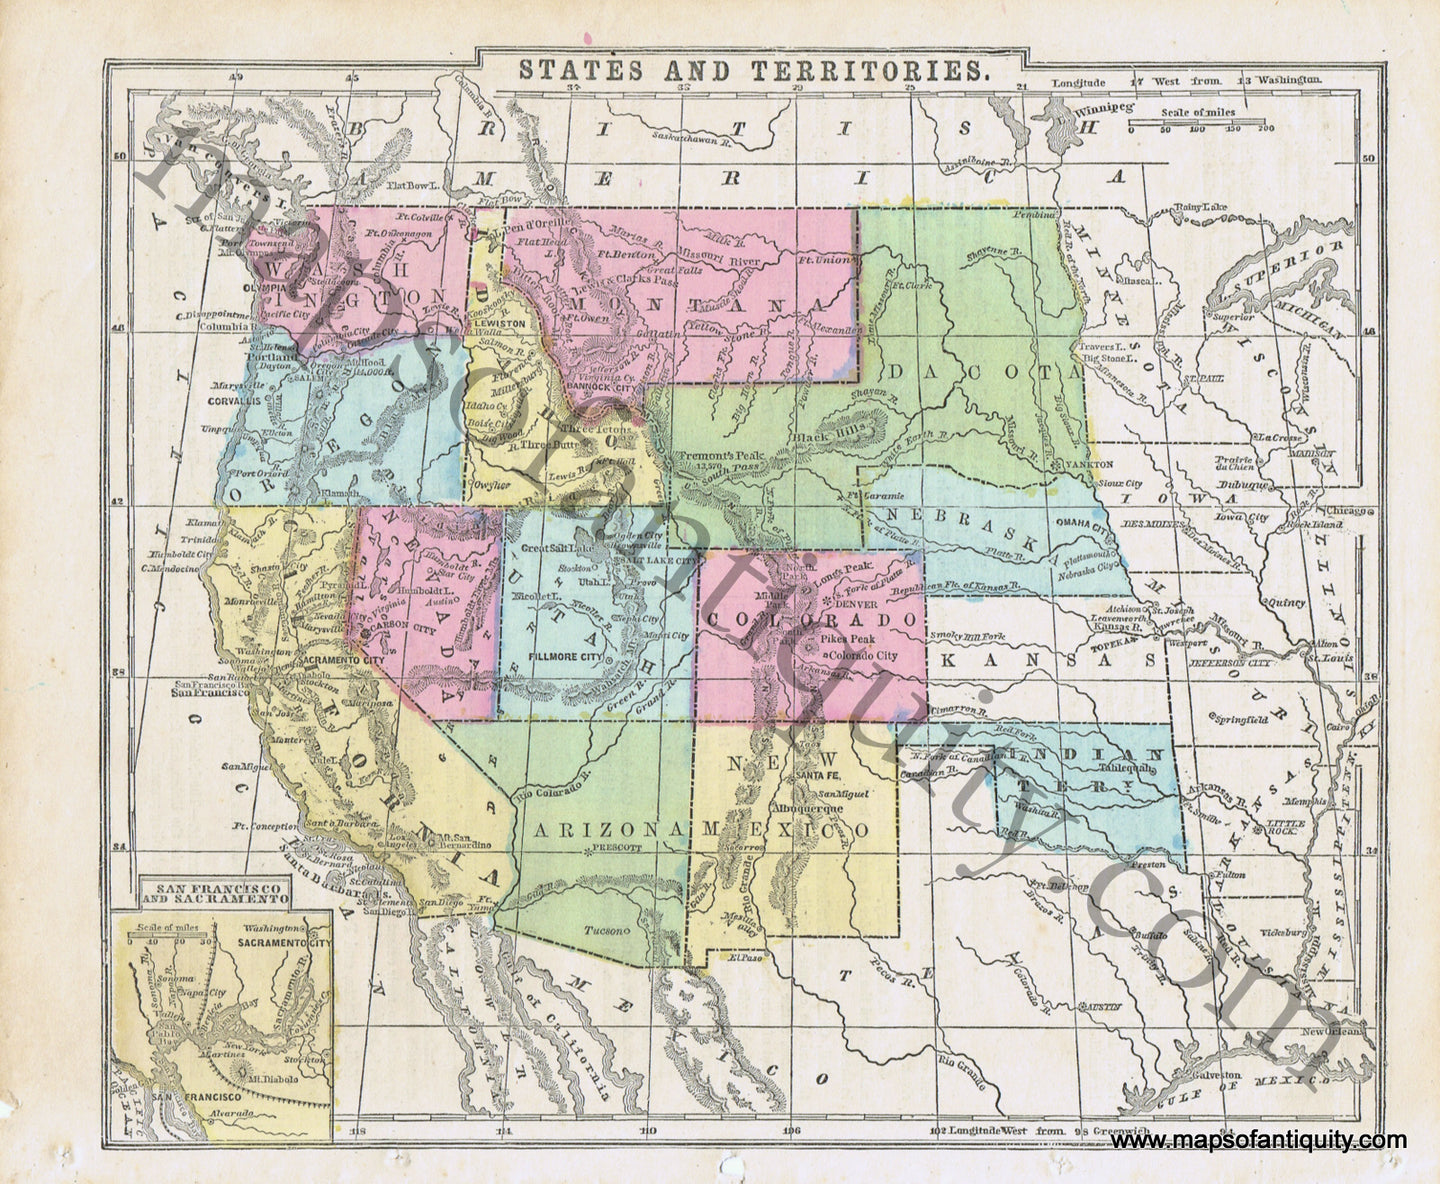 Antique-Hand-Colored-Map-States-and-Territories-United-States-West-c.-1865-School-Geography-Maps-Of-Antiquity